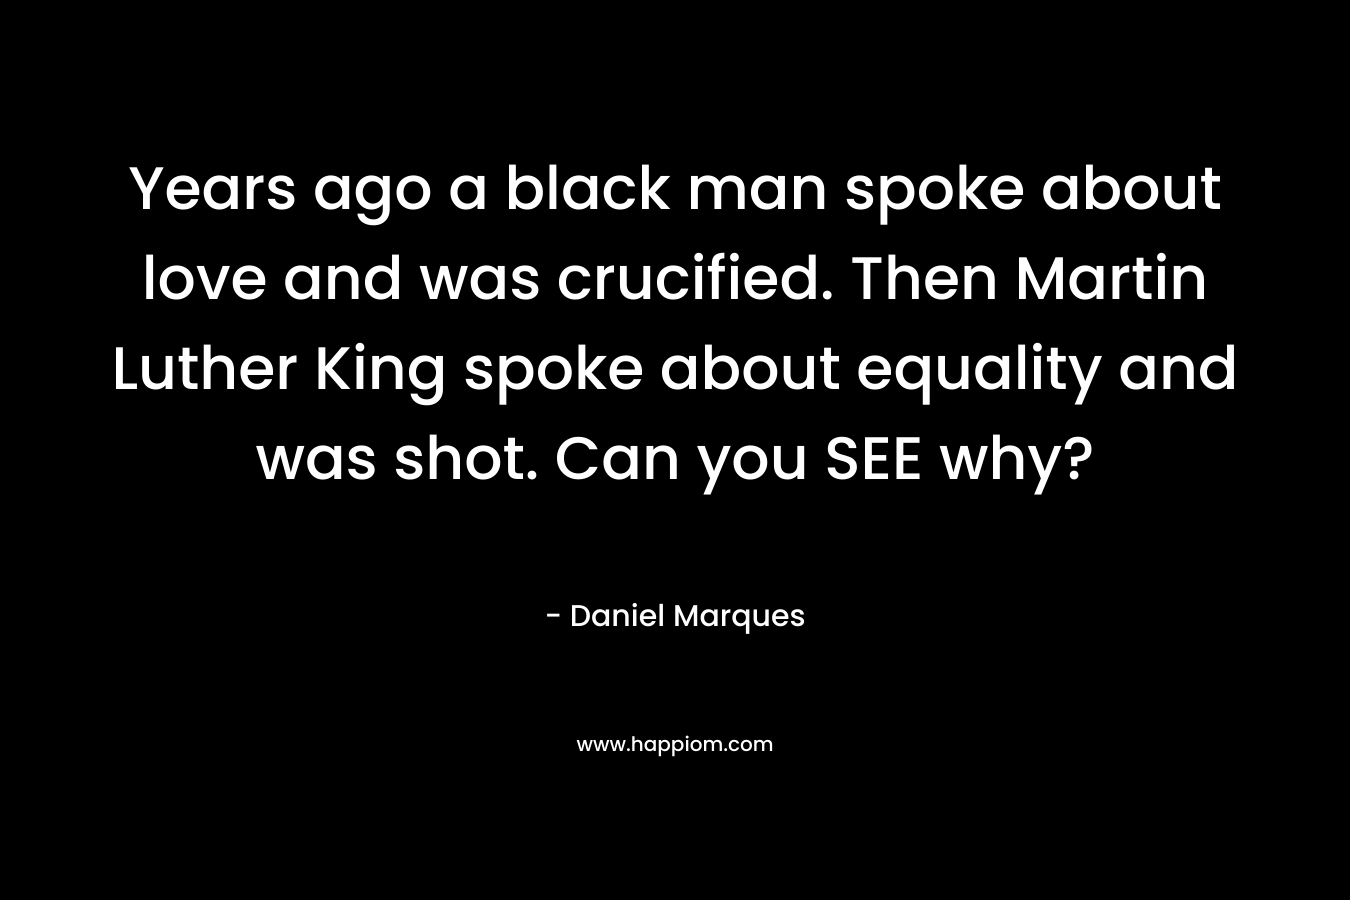 Years ago a black man spoke about love and was crucified. Then Martin Luther King spoke about equality and was shot. Can you SEE why? – Daniel Marques